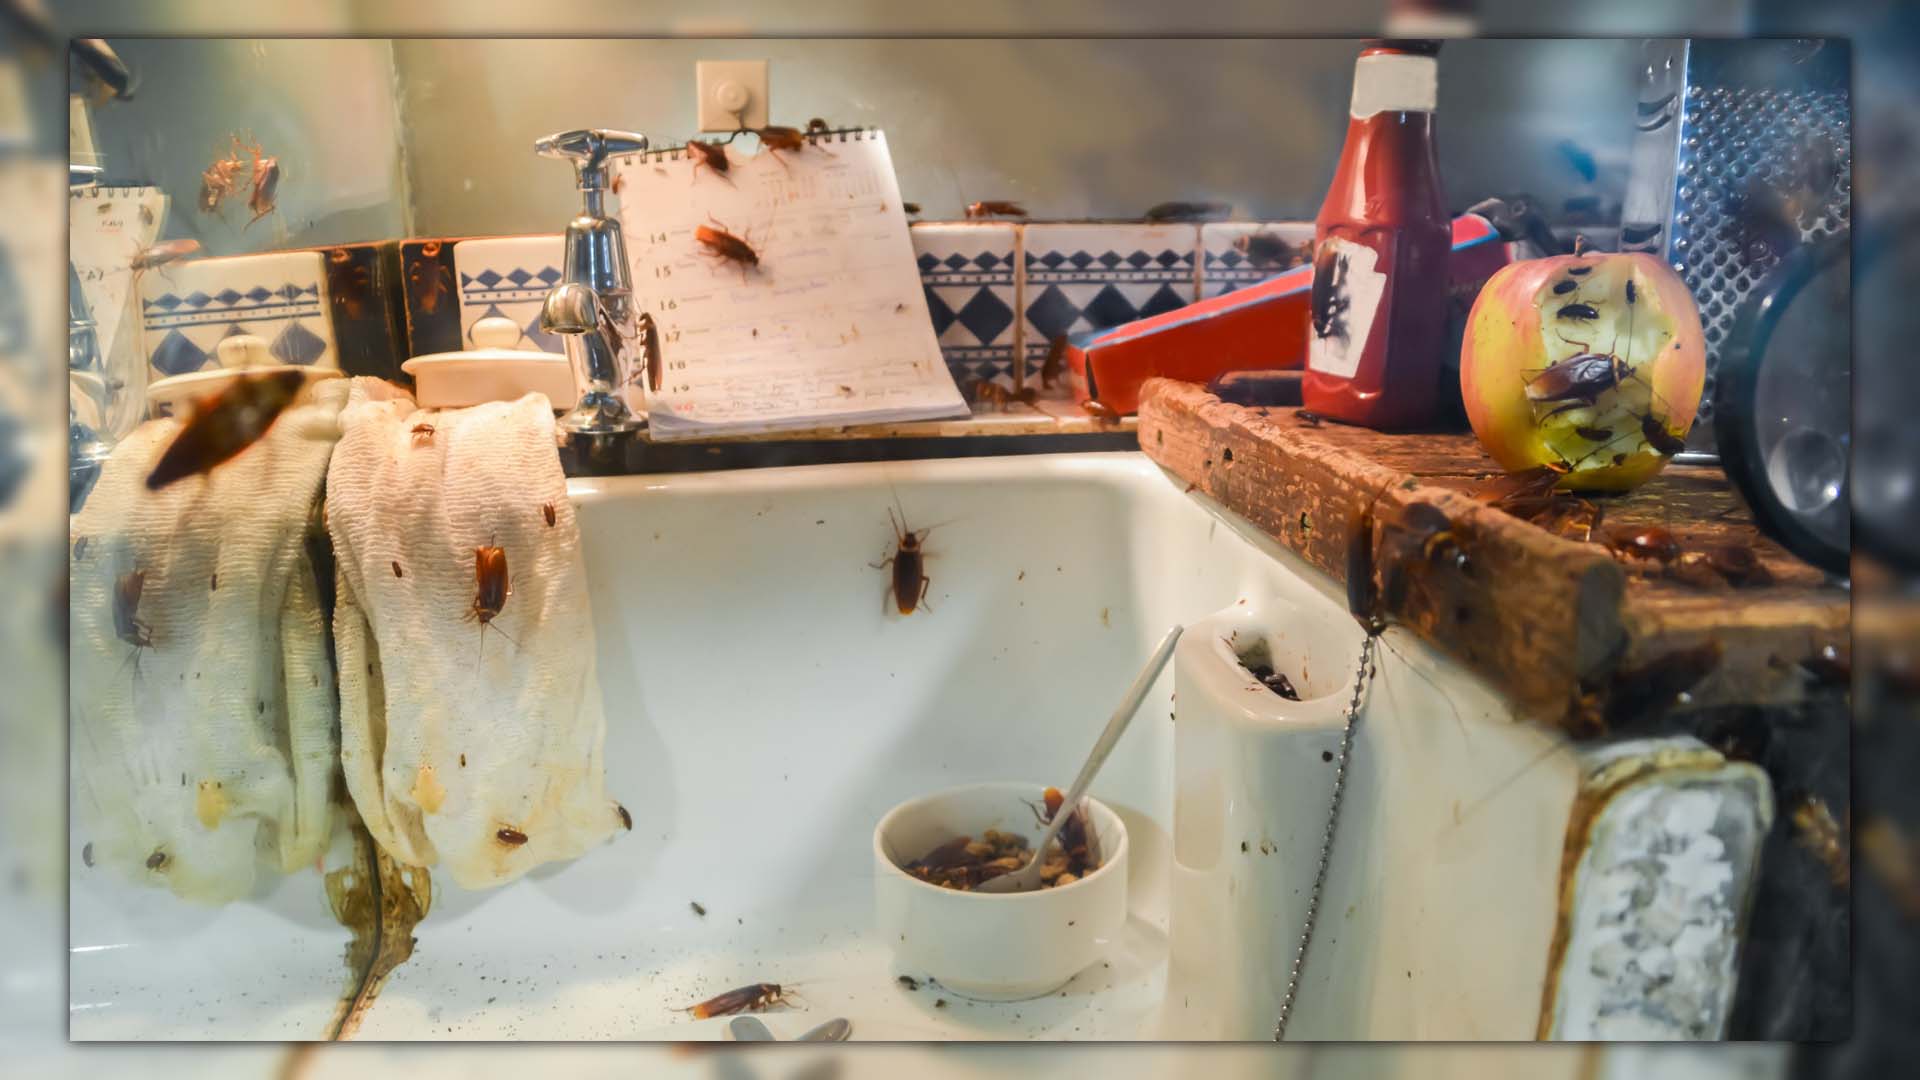 Finding Dead Roaches: Why Only Corpses in Your Home?